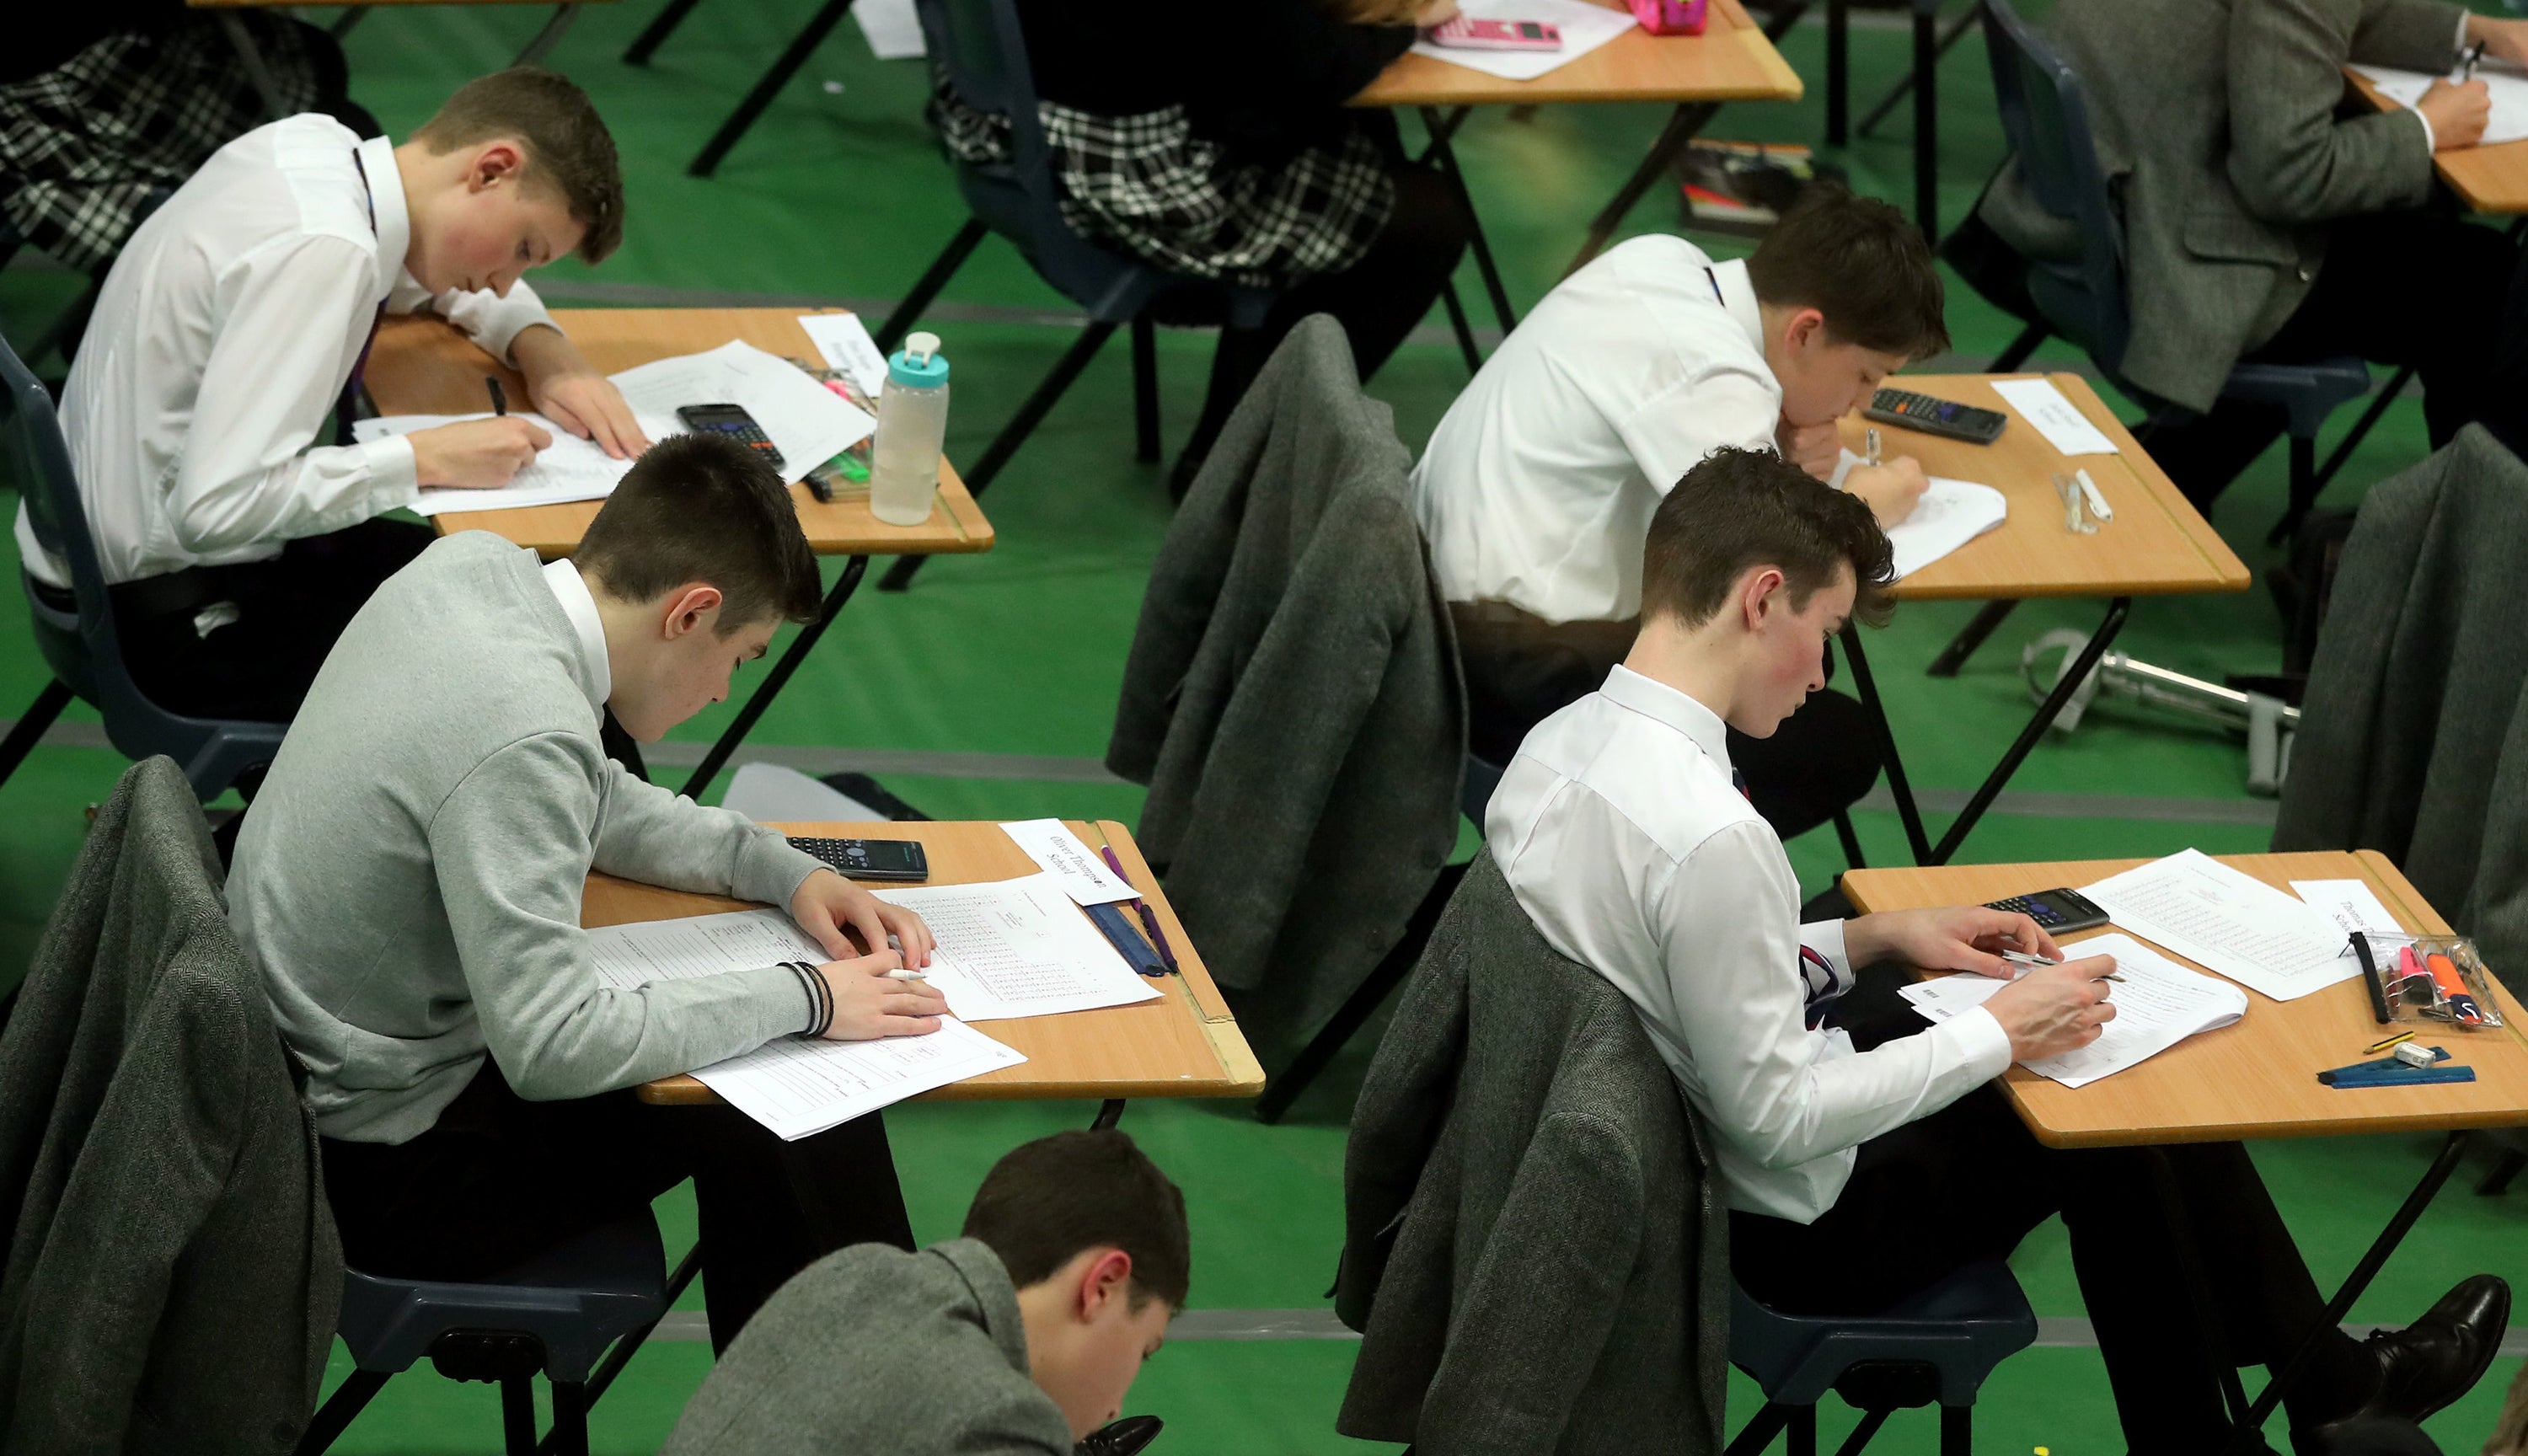 Education minister Will Quince said qualifications must “maintain their value” (Gareth Fuller/PA)